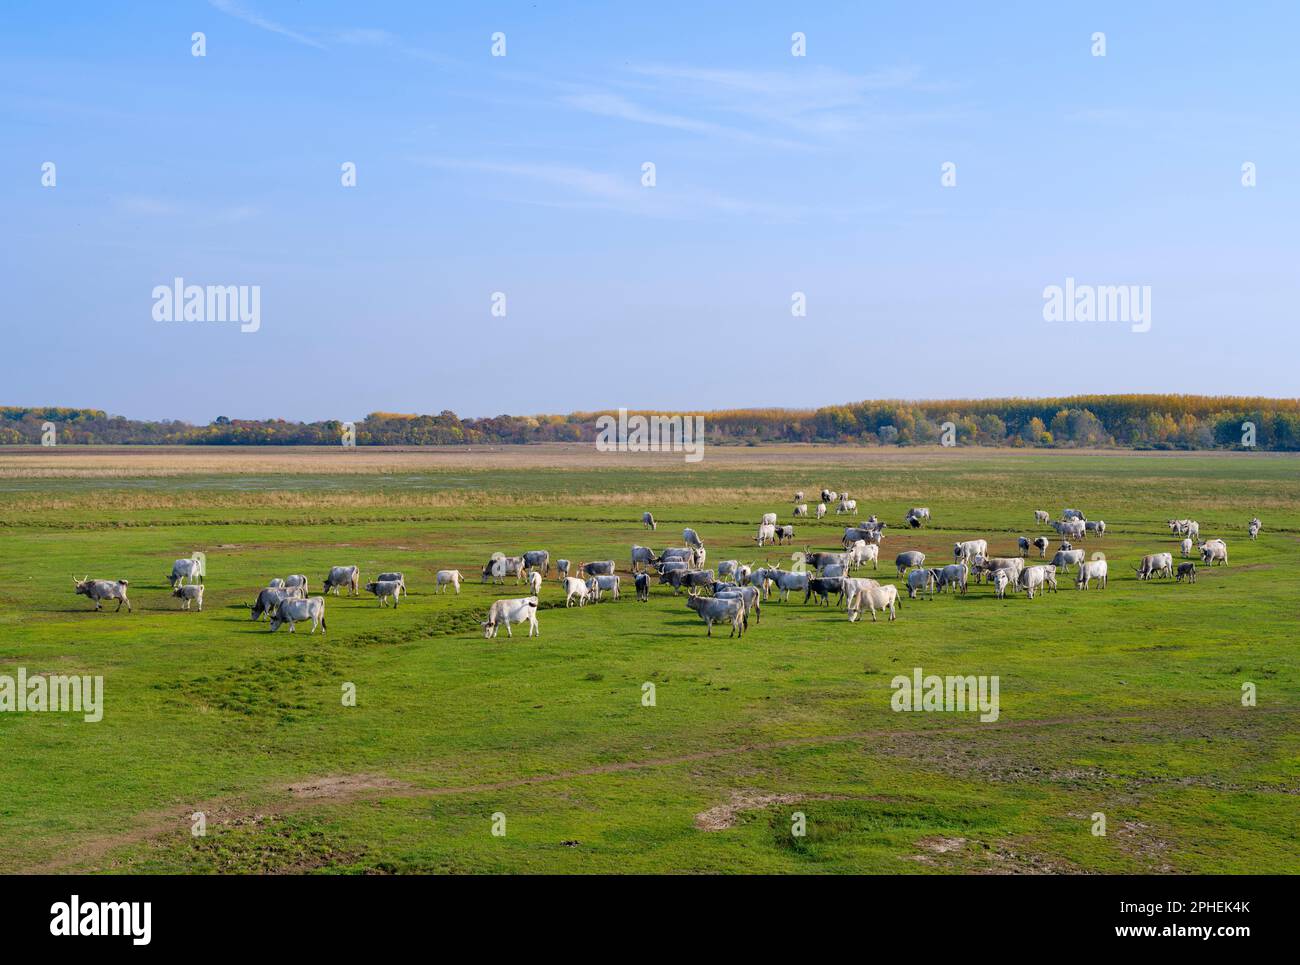 Hungarian Grey Cattle or Hungarian Steppe Cattle (bos primigenus hungaricus), an old and hardy rare cattle breed in the National Park Hortobagy. the N Stock Photo